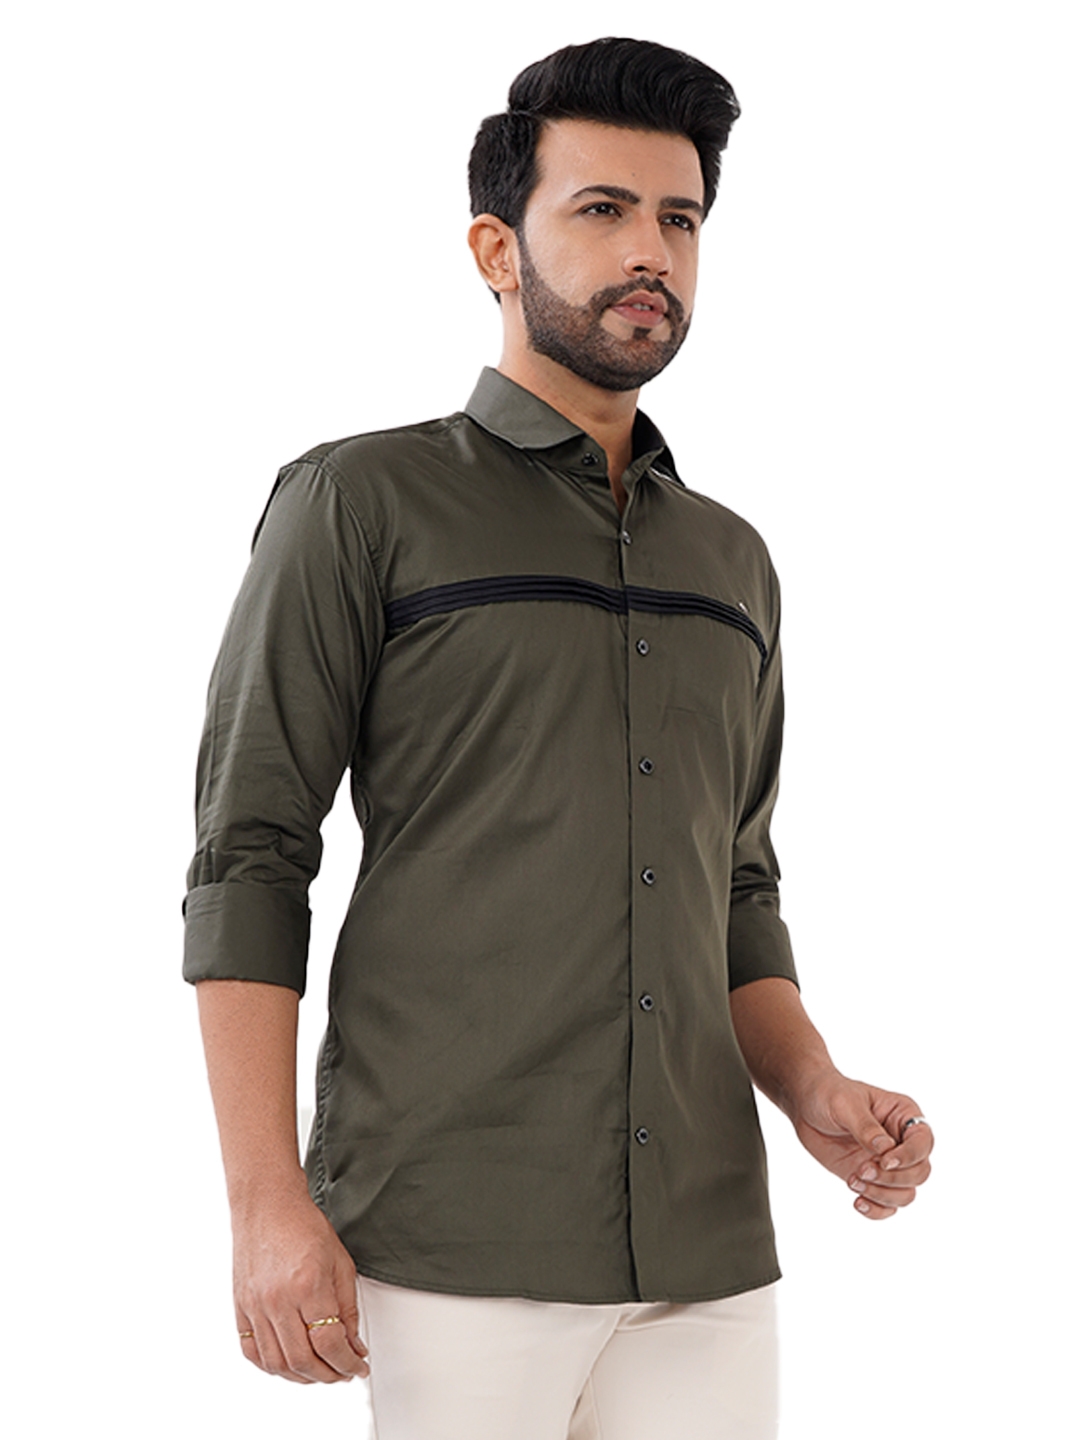 D'cot by Donear | D'cot by Donear Men's Green Cotton Casual Shirts 1